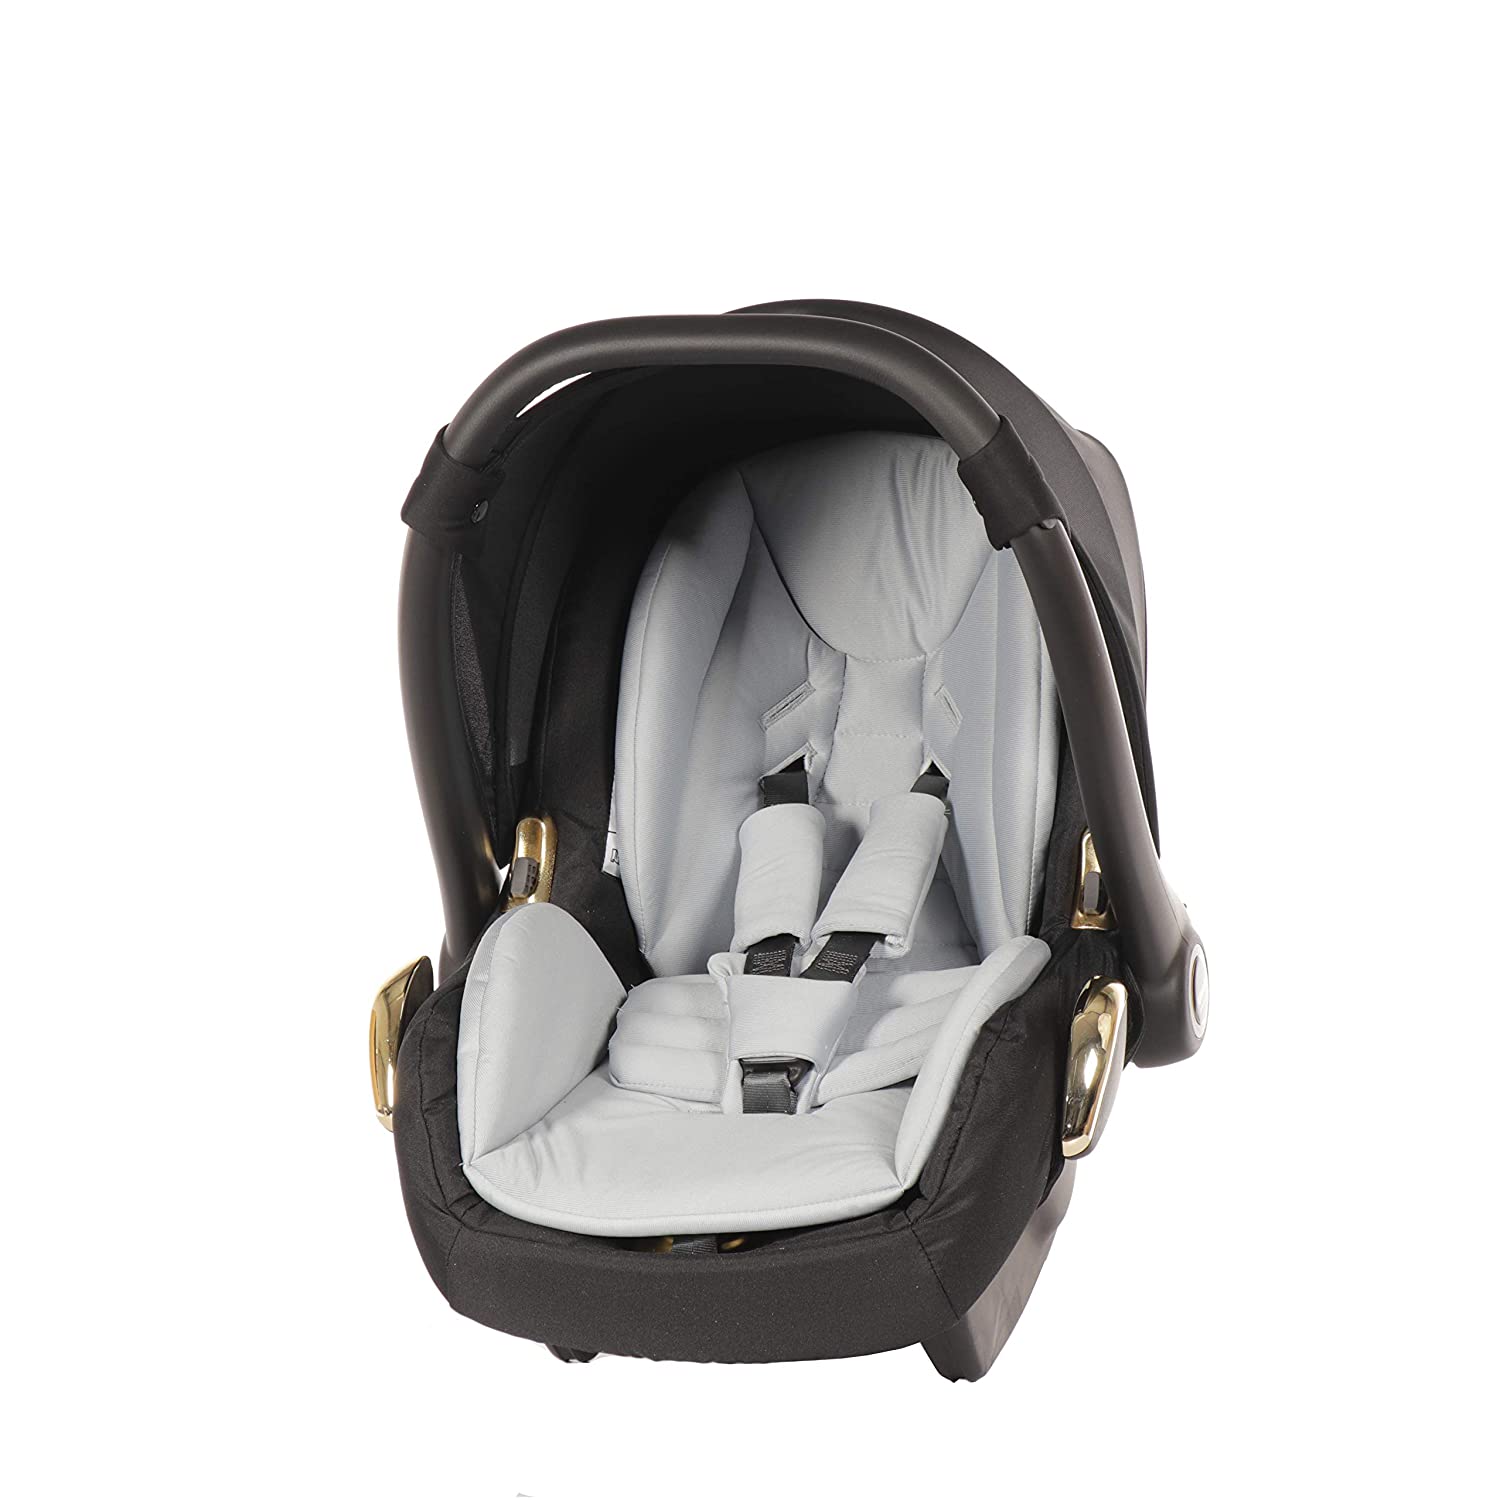 Twin Junama Duo S-Line Pushchair for Siblings (02. Black and Gold, 3-in-1)